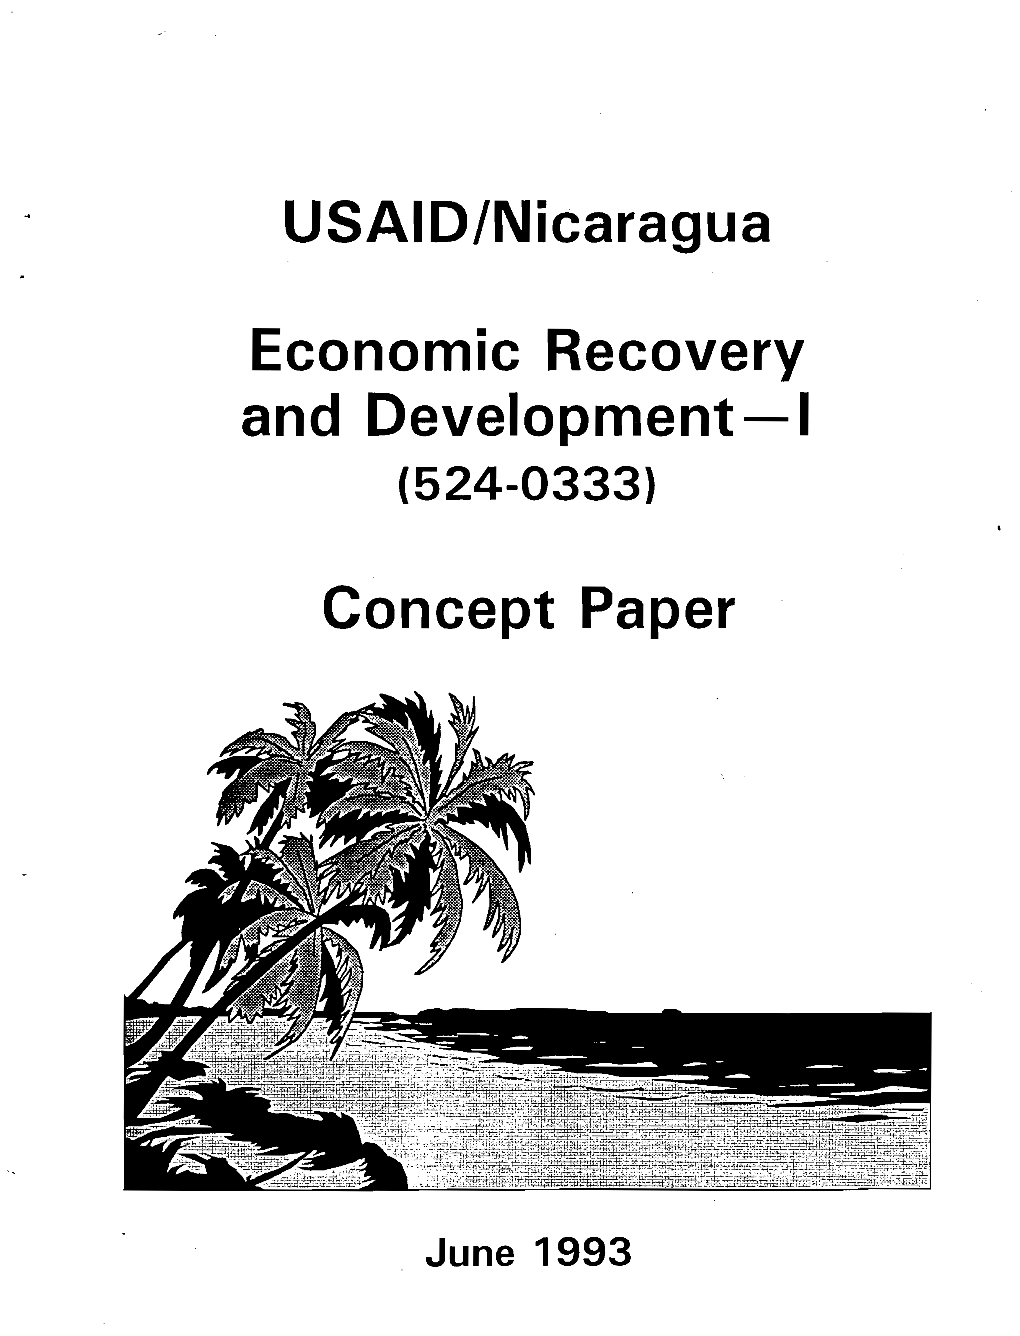 USAID/Nicaragua Economic Recovery and Development-I Concept Paper